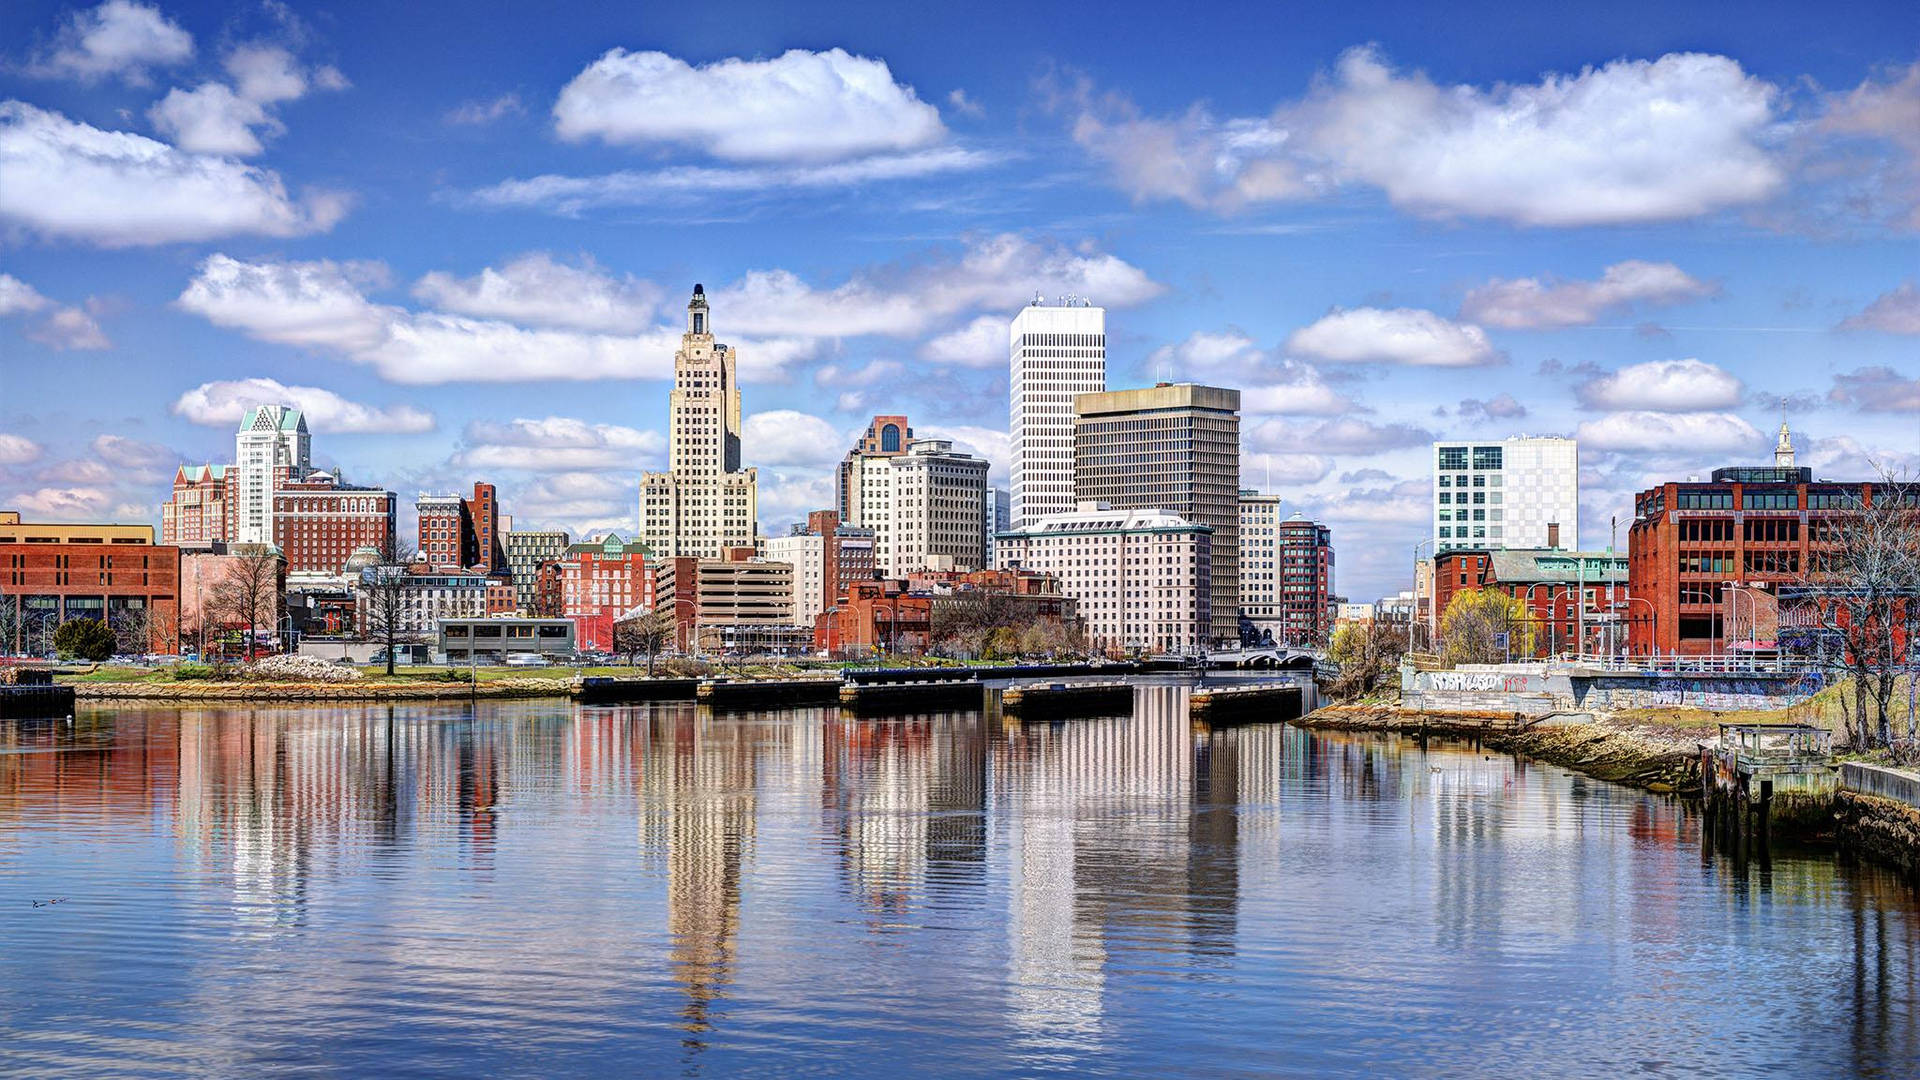 Rhode Island's Business District In The Daytime Wallpaper